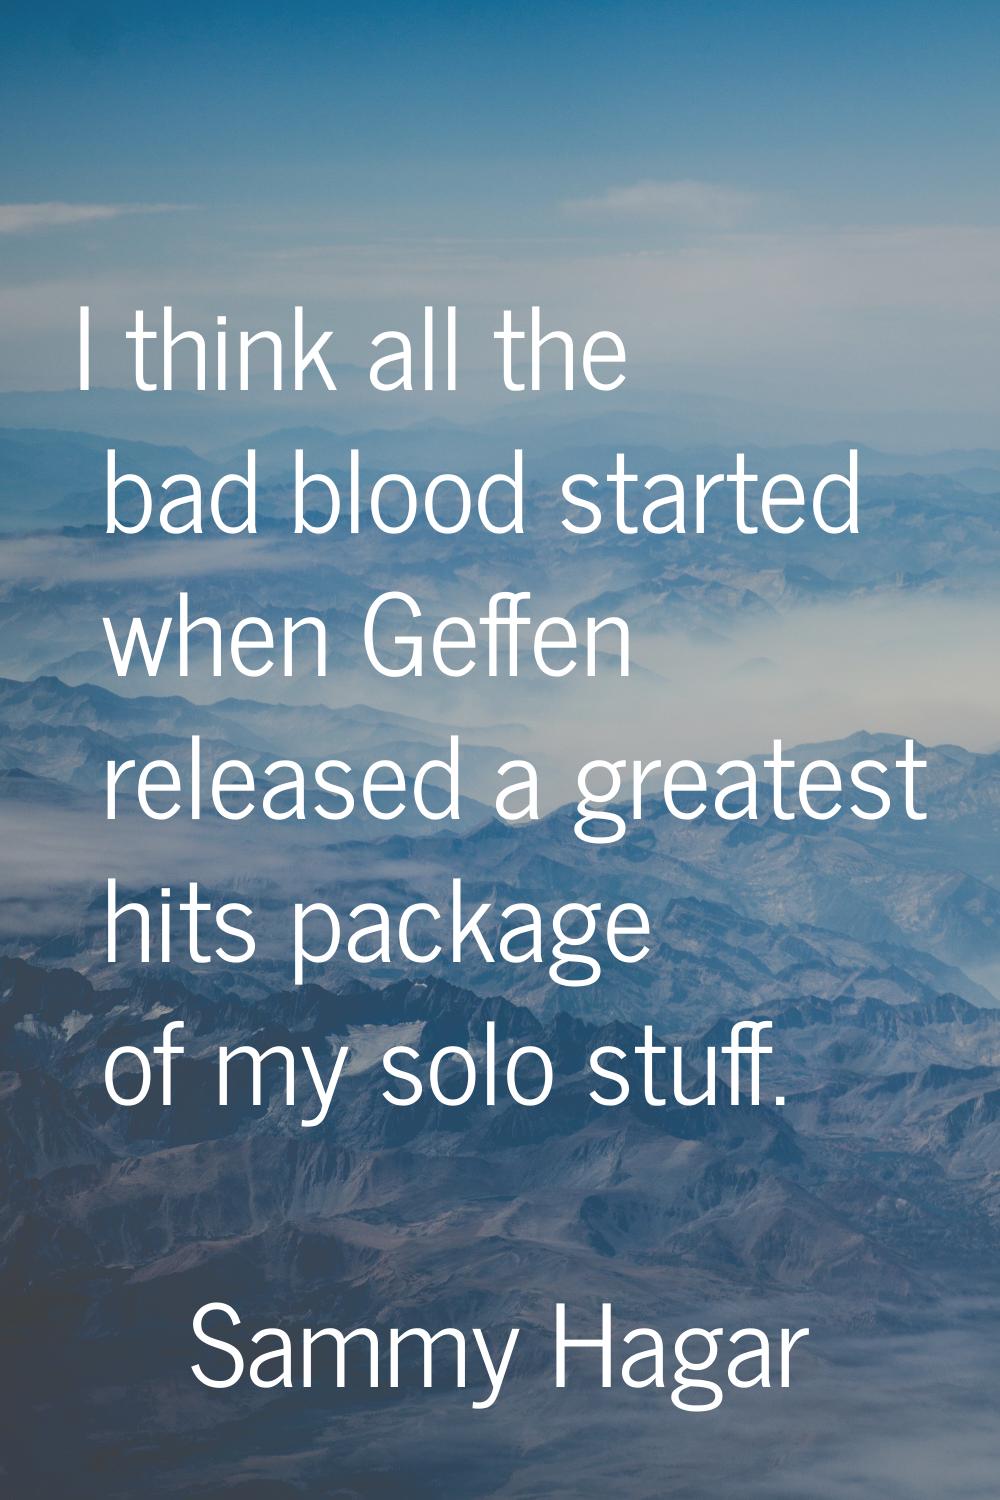 I think all the bad blood started when Geffen released a greatest hits package of my solo stuff.